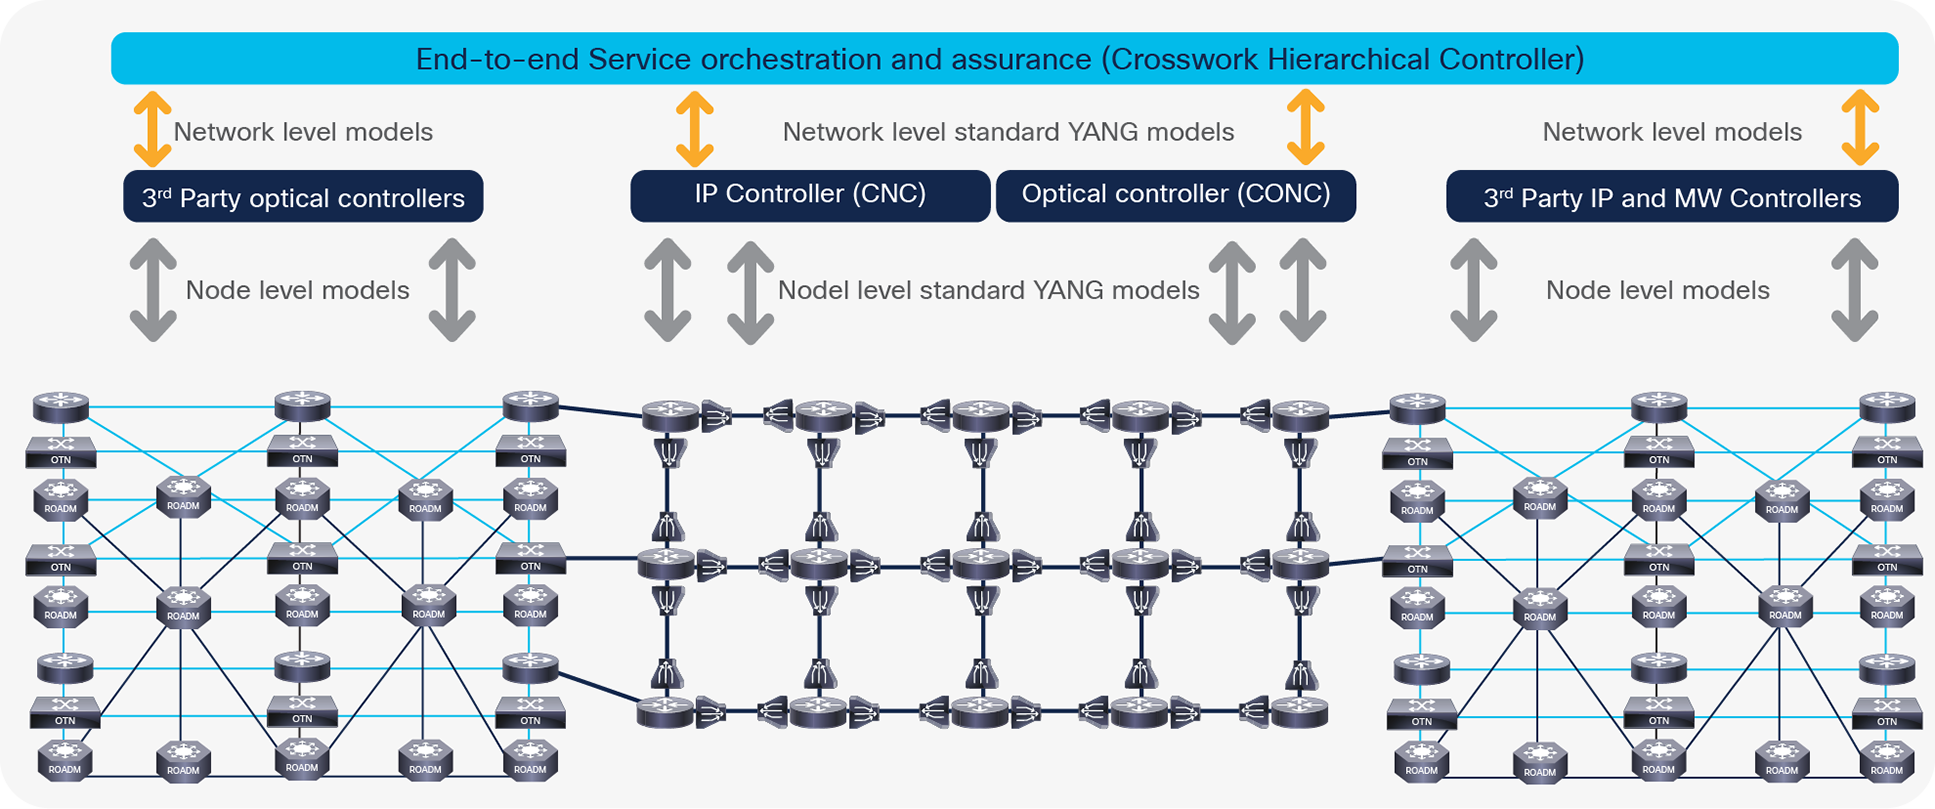 Controlling a hybrid network of Routed Optical Networking and legacy domains